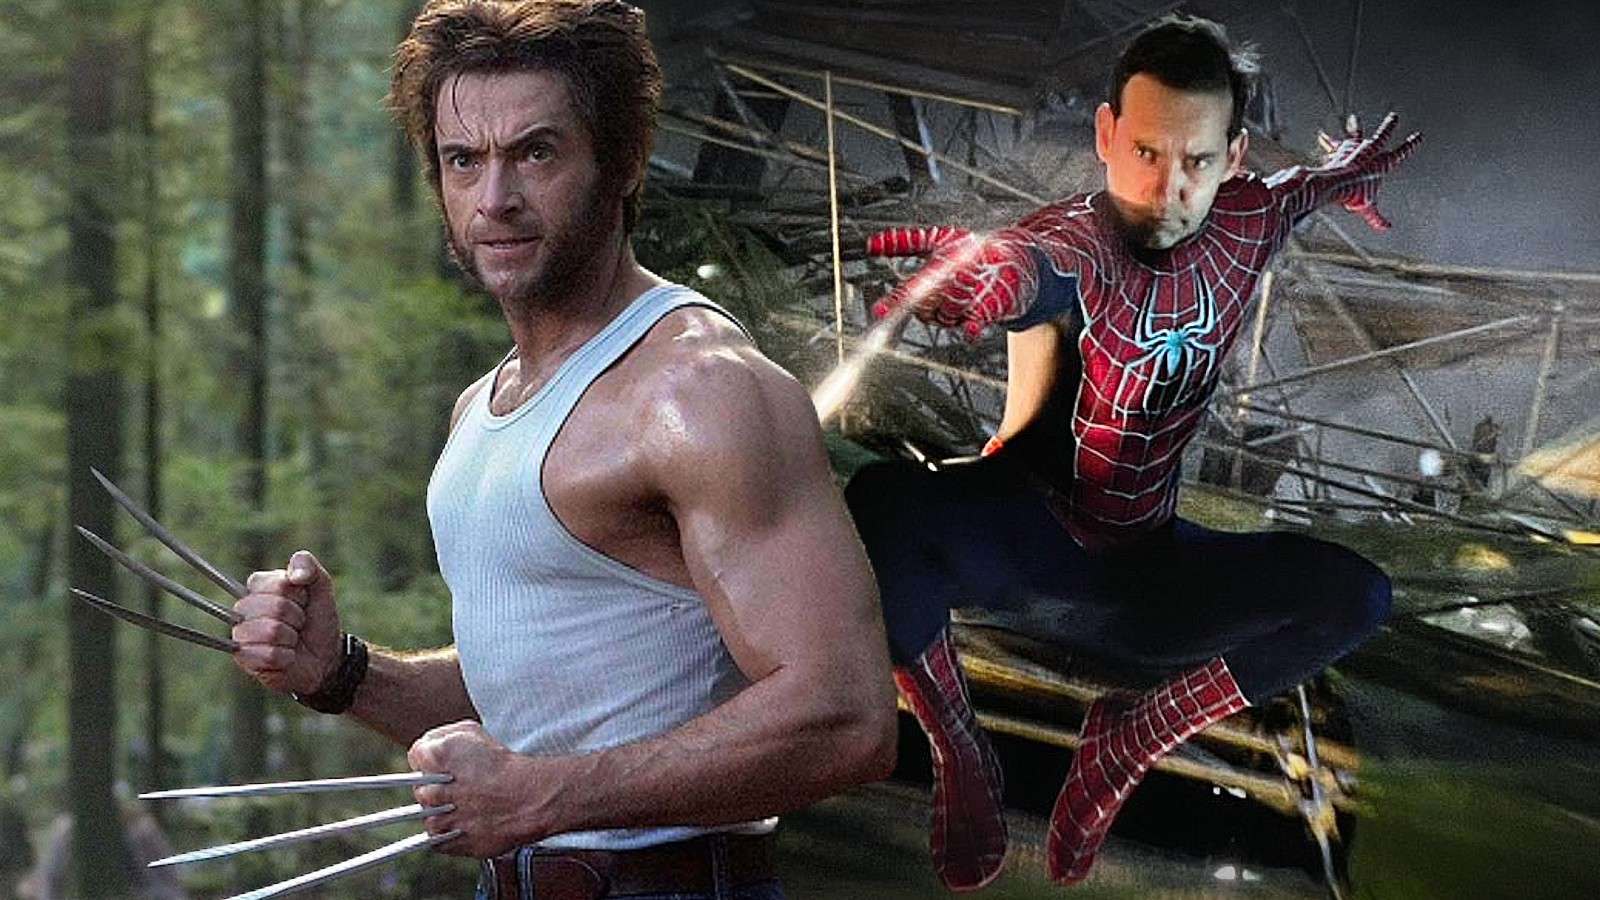 Hugh Jackman as Wolverine and Tobey Maguire as Spider-Man, who are rumored to return for Avengers: Secret Wars